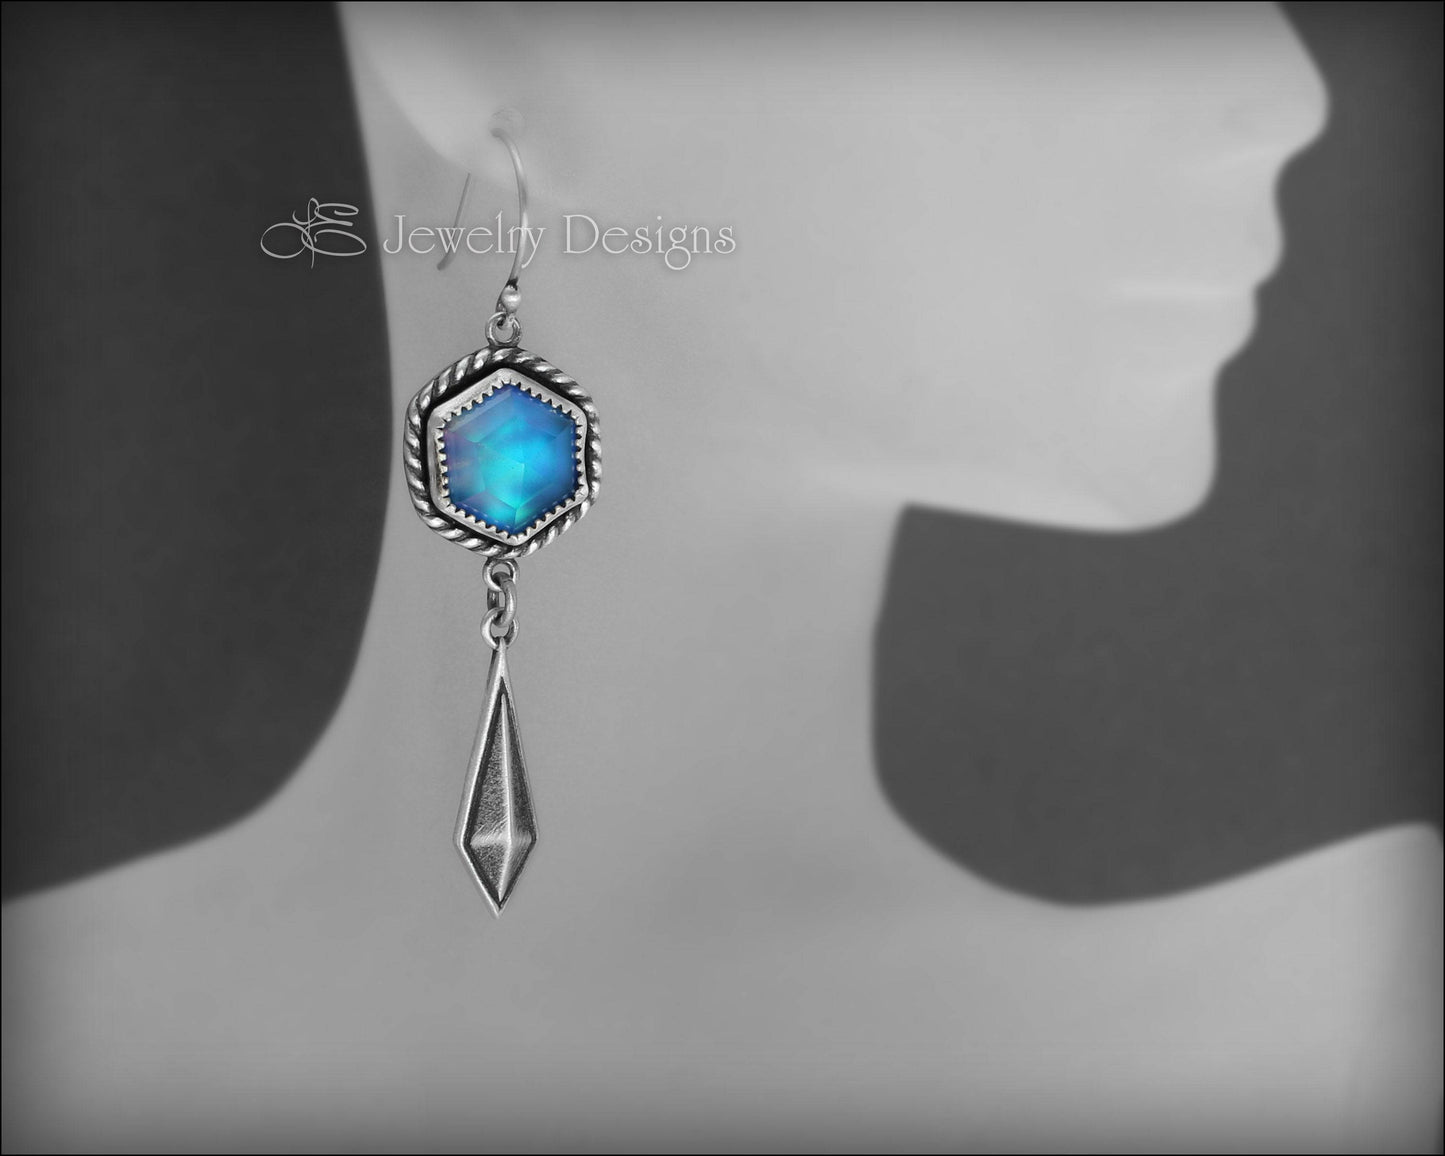 Load image into Gallery viewer, Rose Cut Hexagon Aurora Opal Earrings - LE Jewelry Designs
